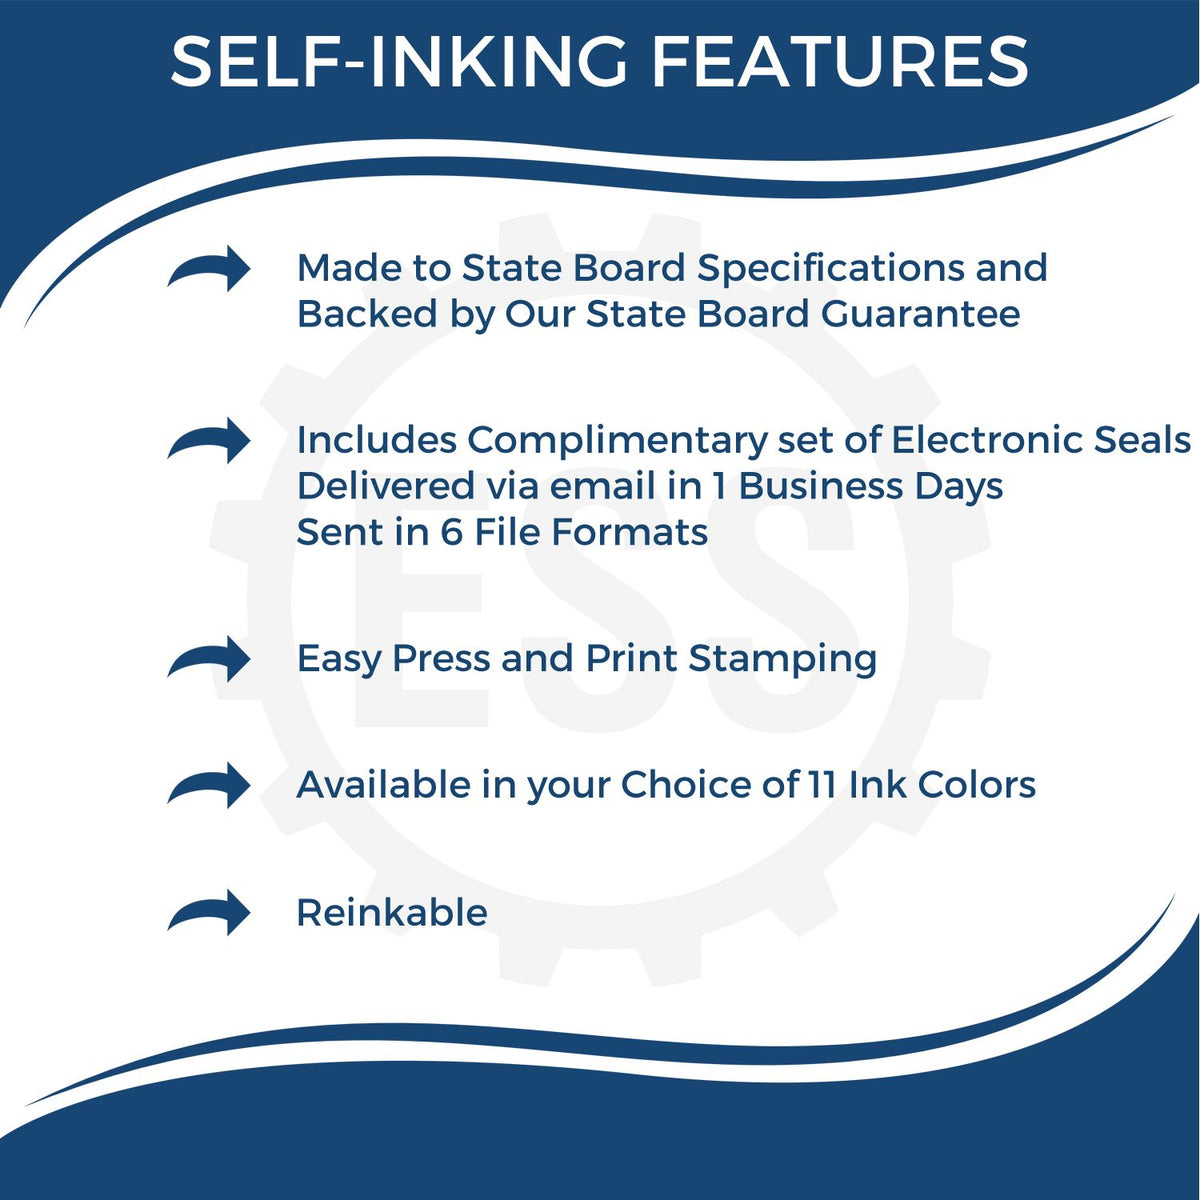 A picture of an infographic highlighting the selling points for the Self-Inking Rectangular Maryland Notary Stamp